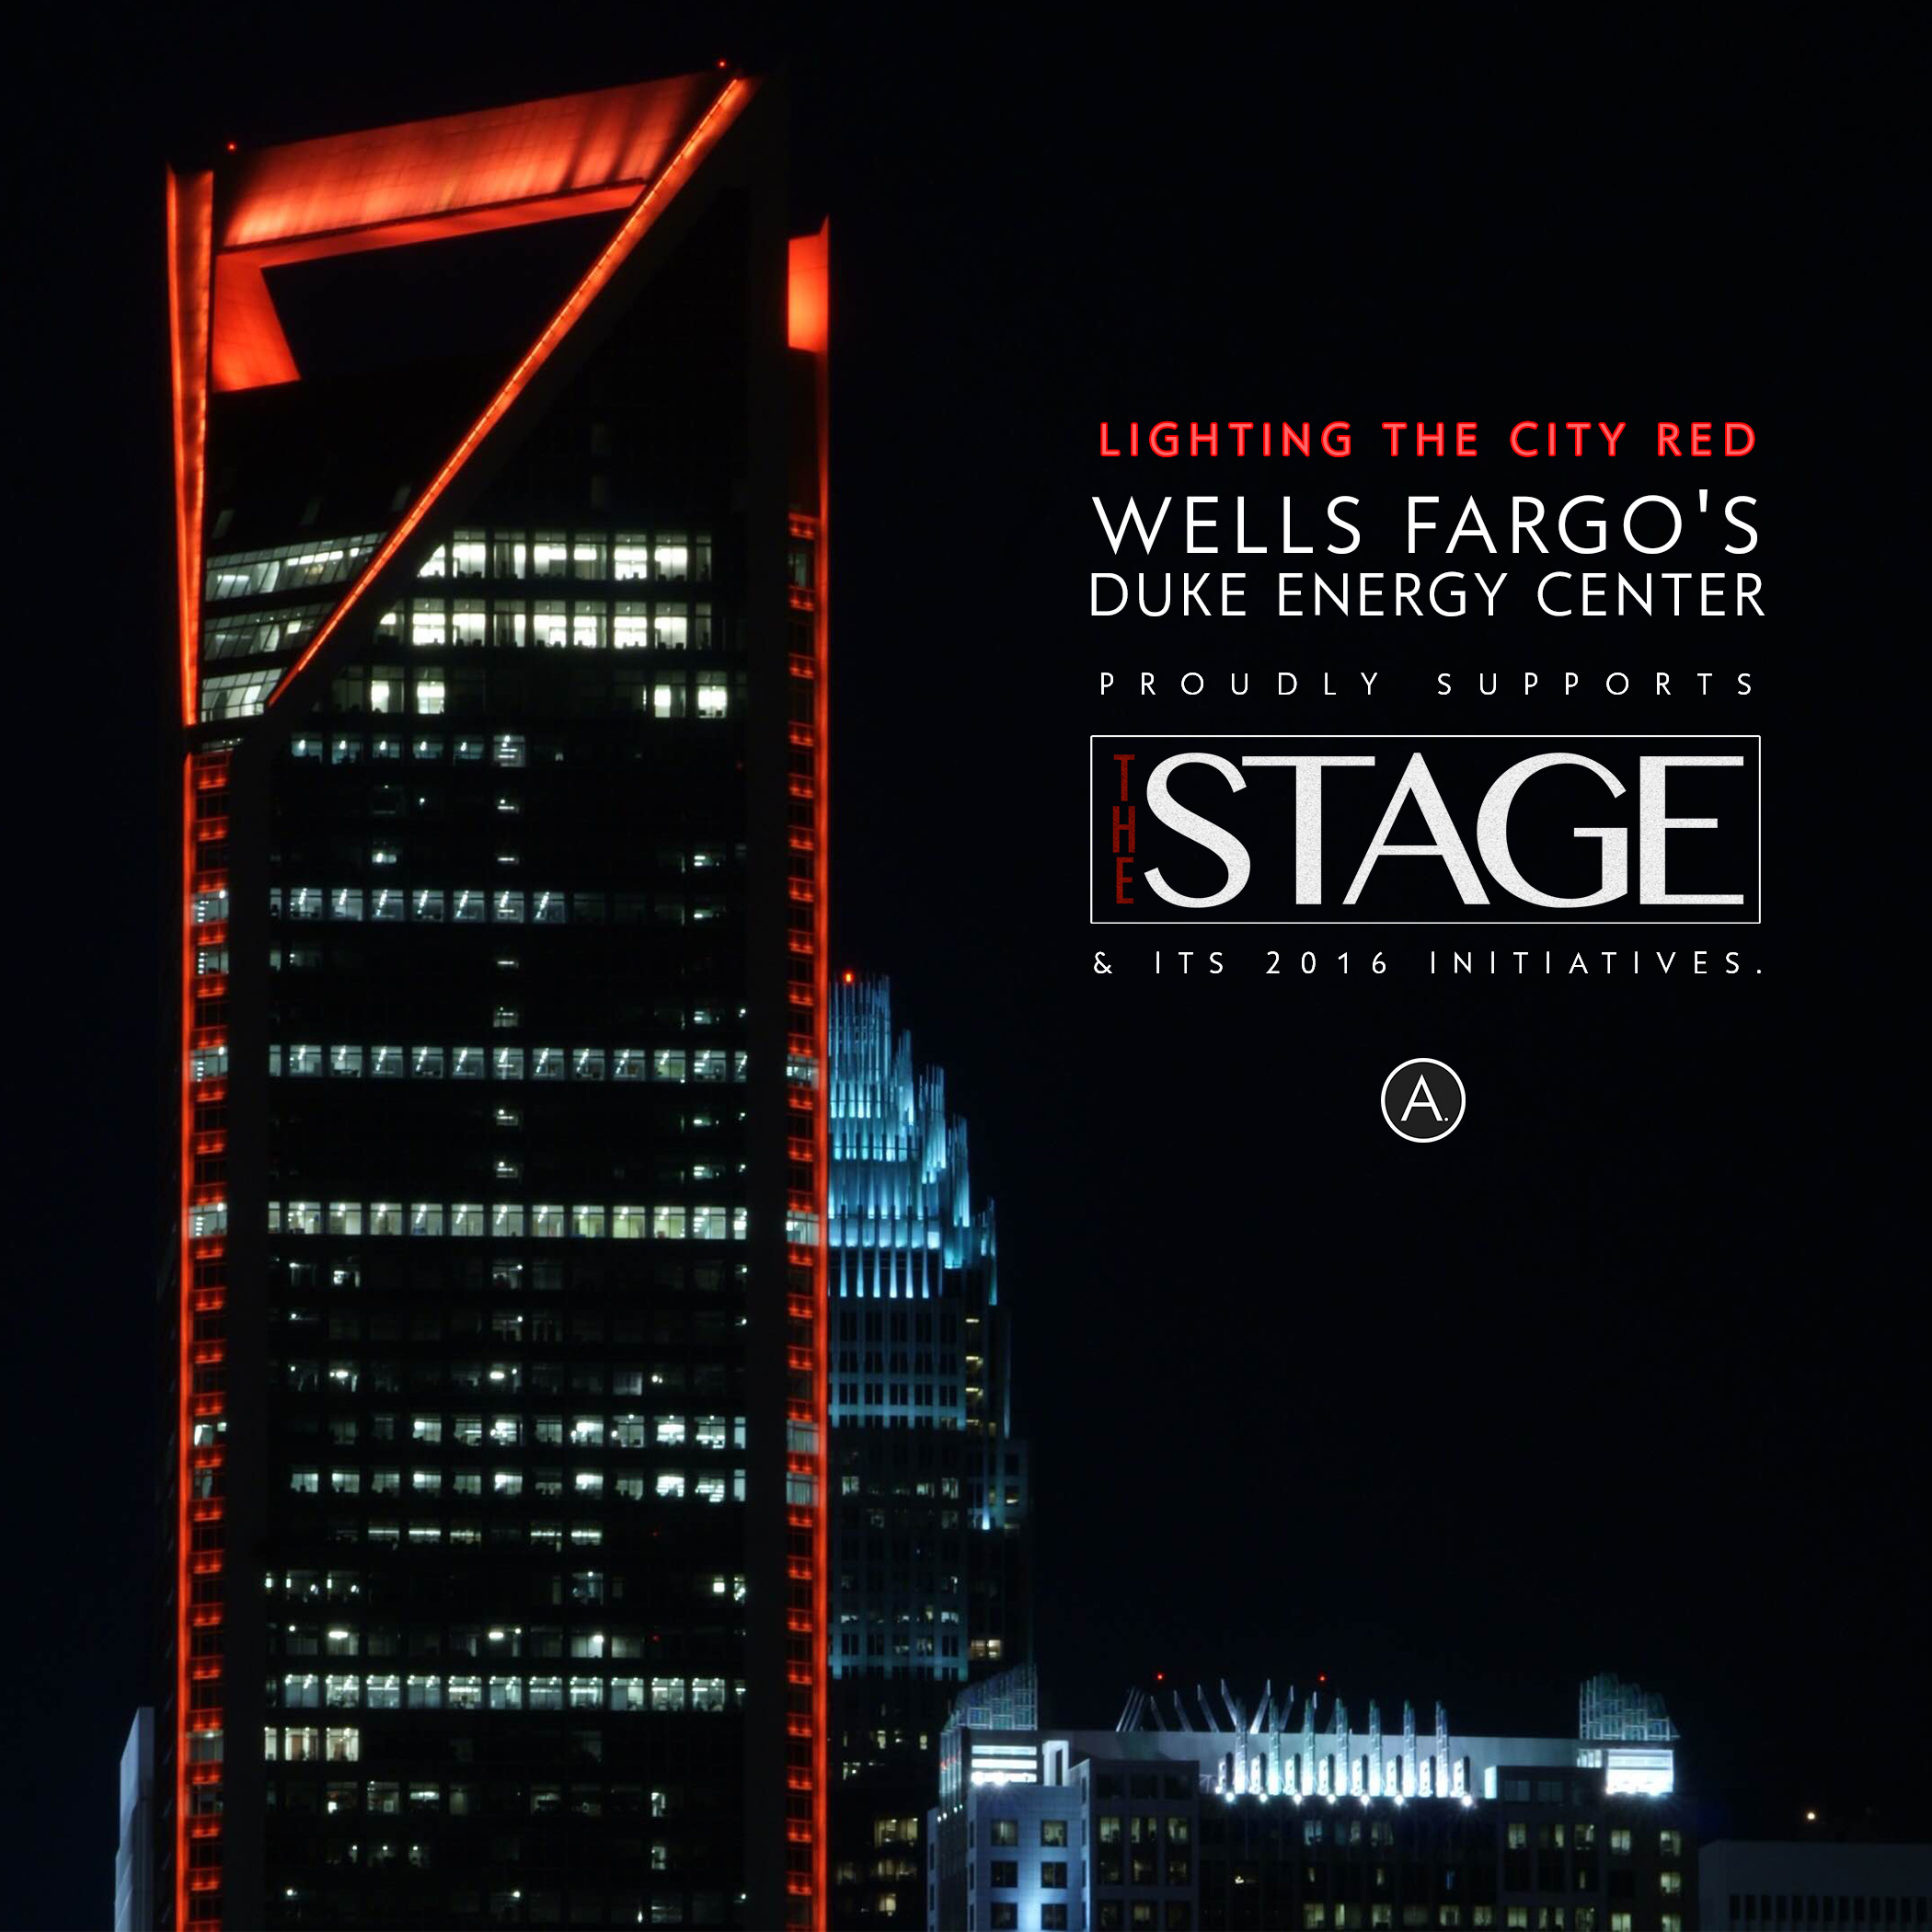 Lighting The City Red Flyer Stage 2016.jpg